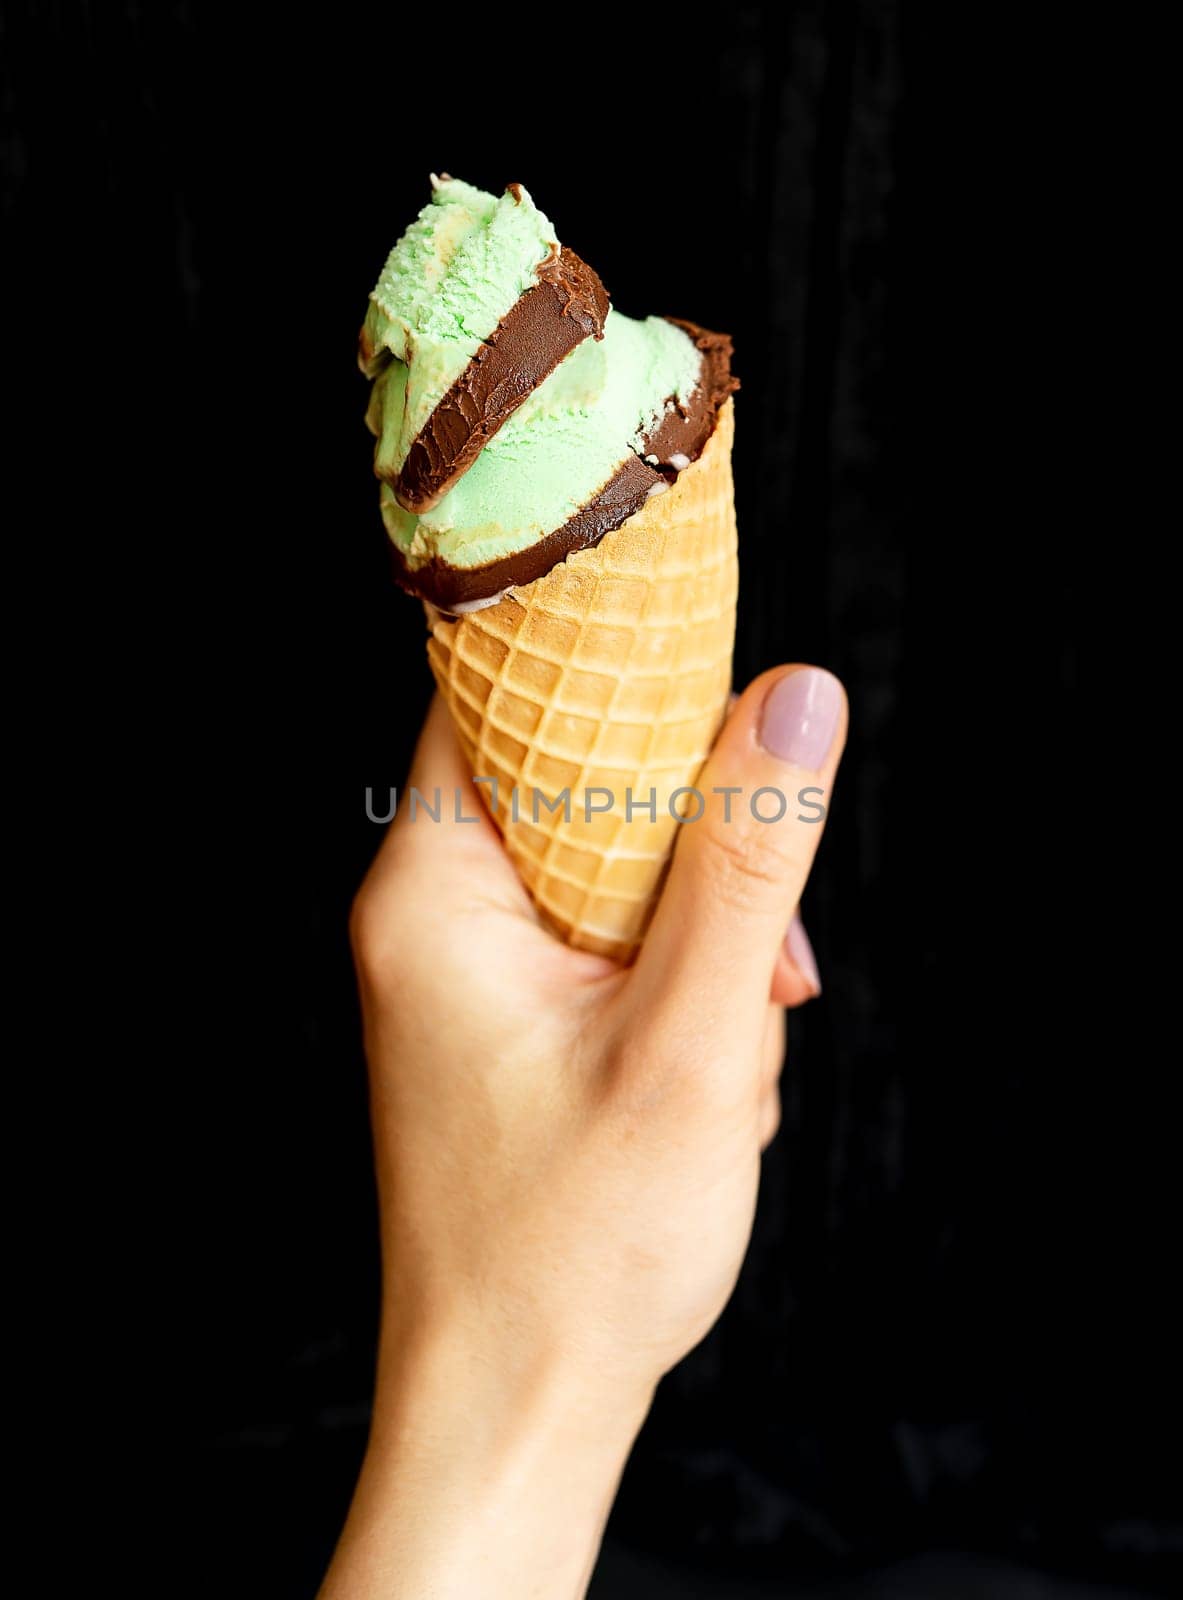 The hand holds soft ice cream in a chocolate-mint waffle cup. On a black background, close-up